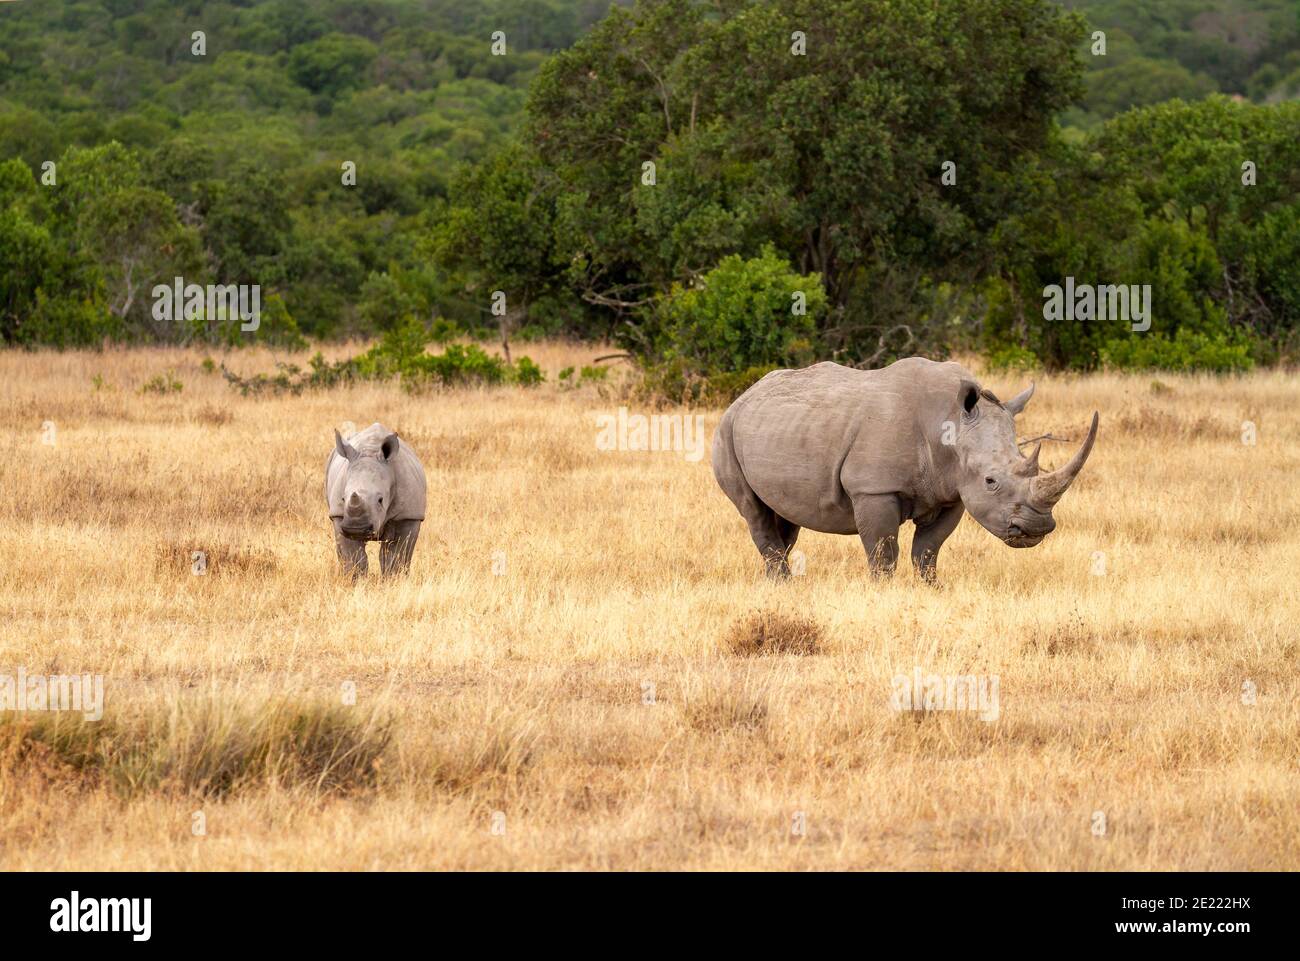 Southern white rhinoceros cow and calf (Ceratotherium simum) in Ol Pejeta Conservancy, Kenya, Africa. Near threatened species also Square-lipped rhino Stock Photo